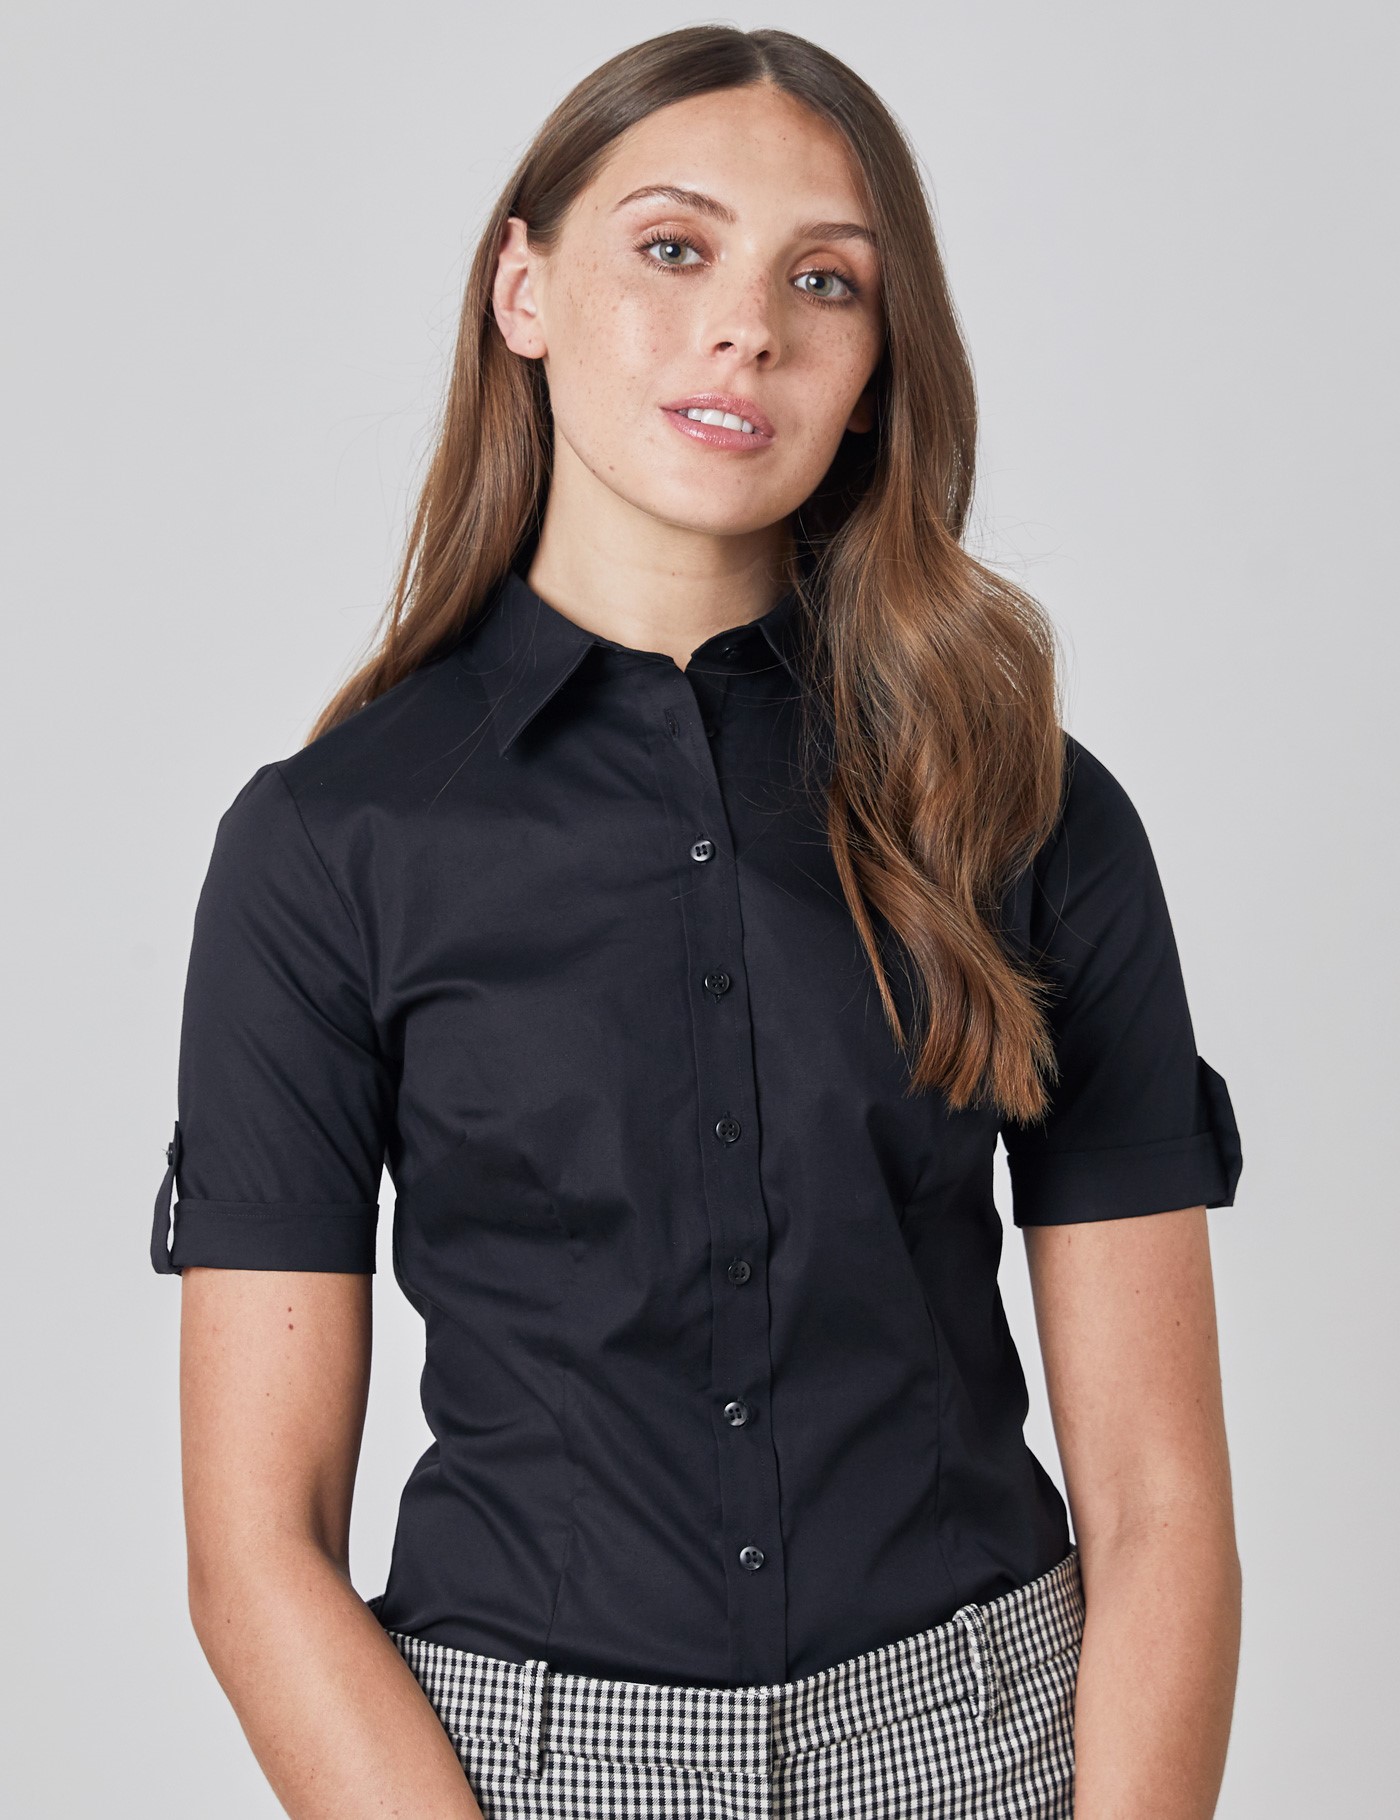 Women's Black Fitted Short Sleeve Shirt | Hawes & Curtis